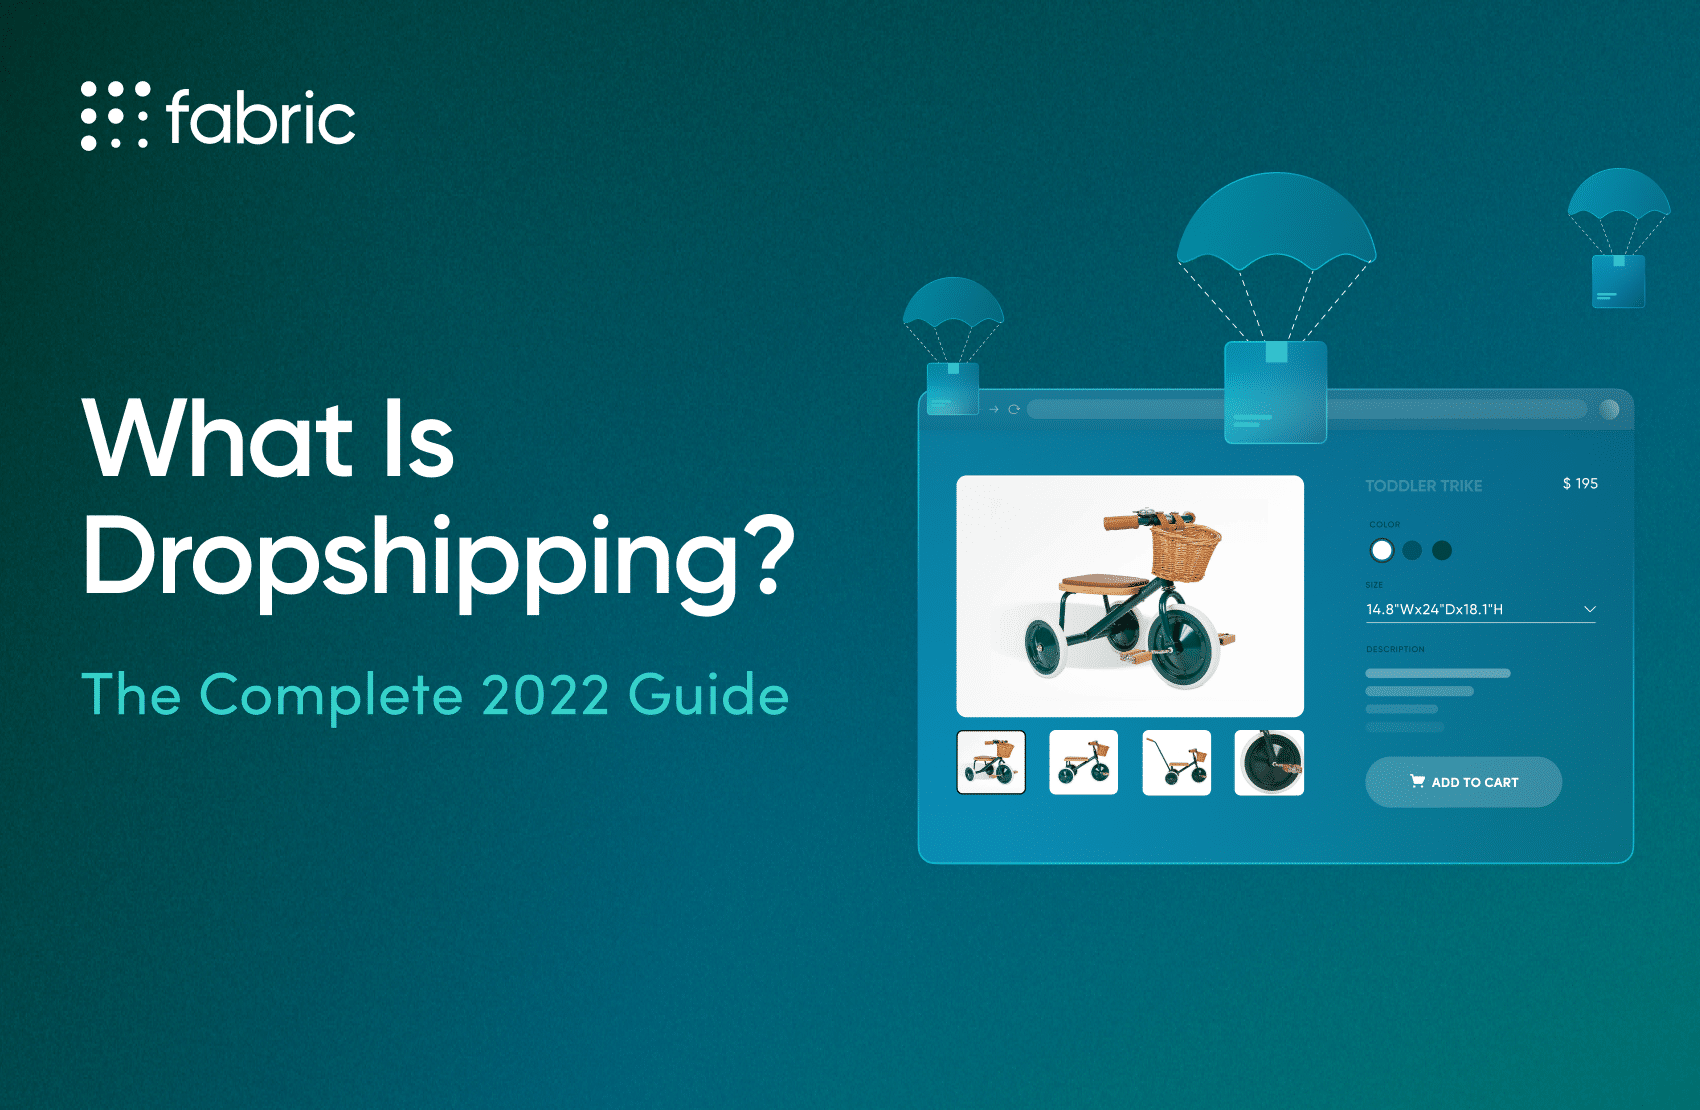 This is the complete 2022 dropshipping guide.